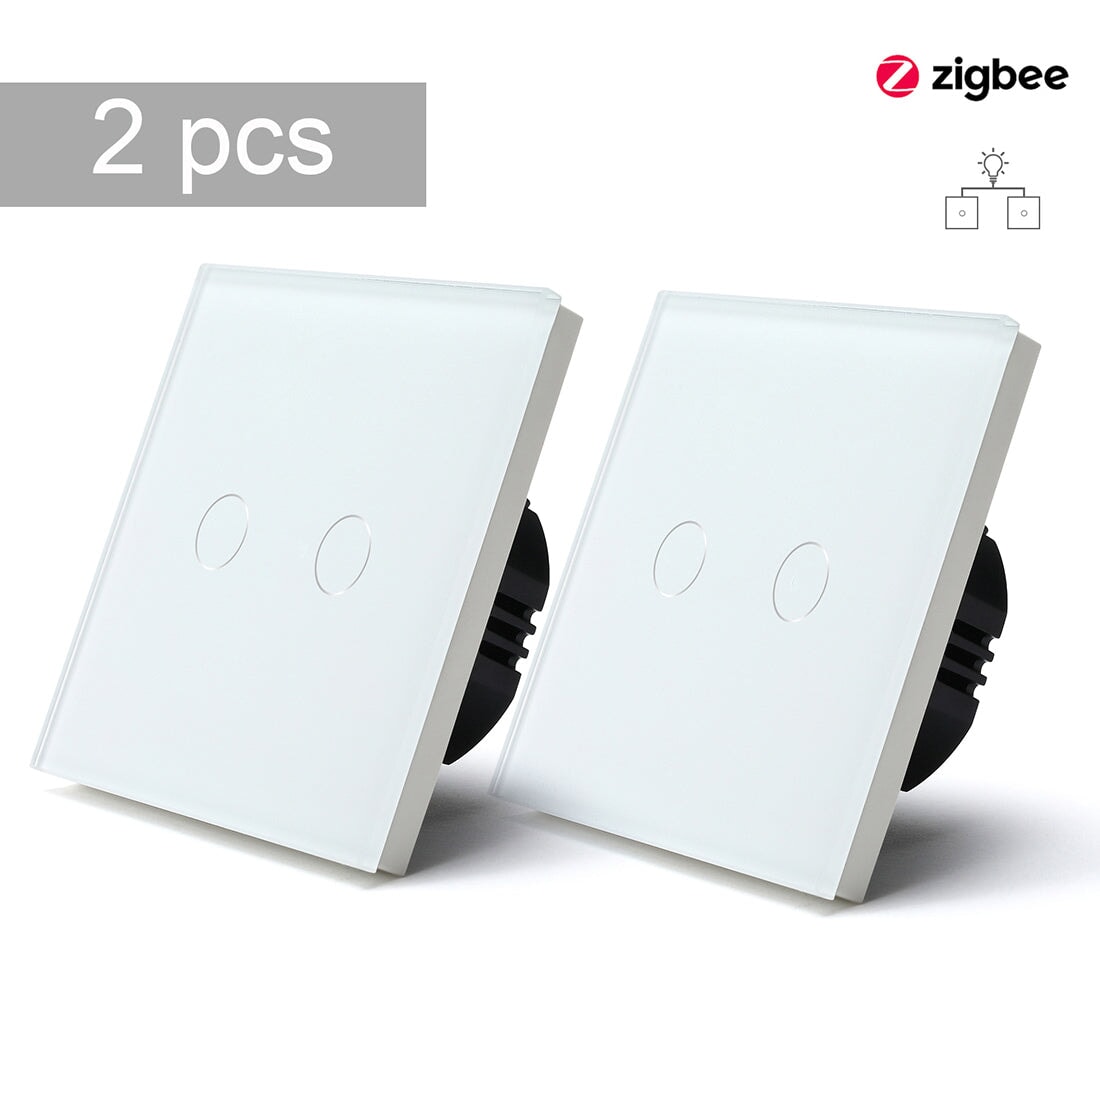 BSEED Zigbee Single Live Line Switch 1/2/3 Gang 1/2/3 Way Wall Smart Light Switch Single Live Line 1/2/3 pack Light Switches Bseedswitch White 2Gang 2 Pcs/Pack